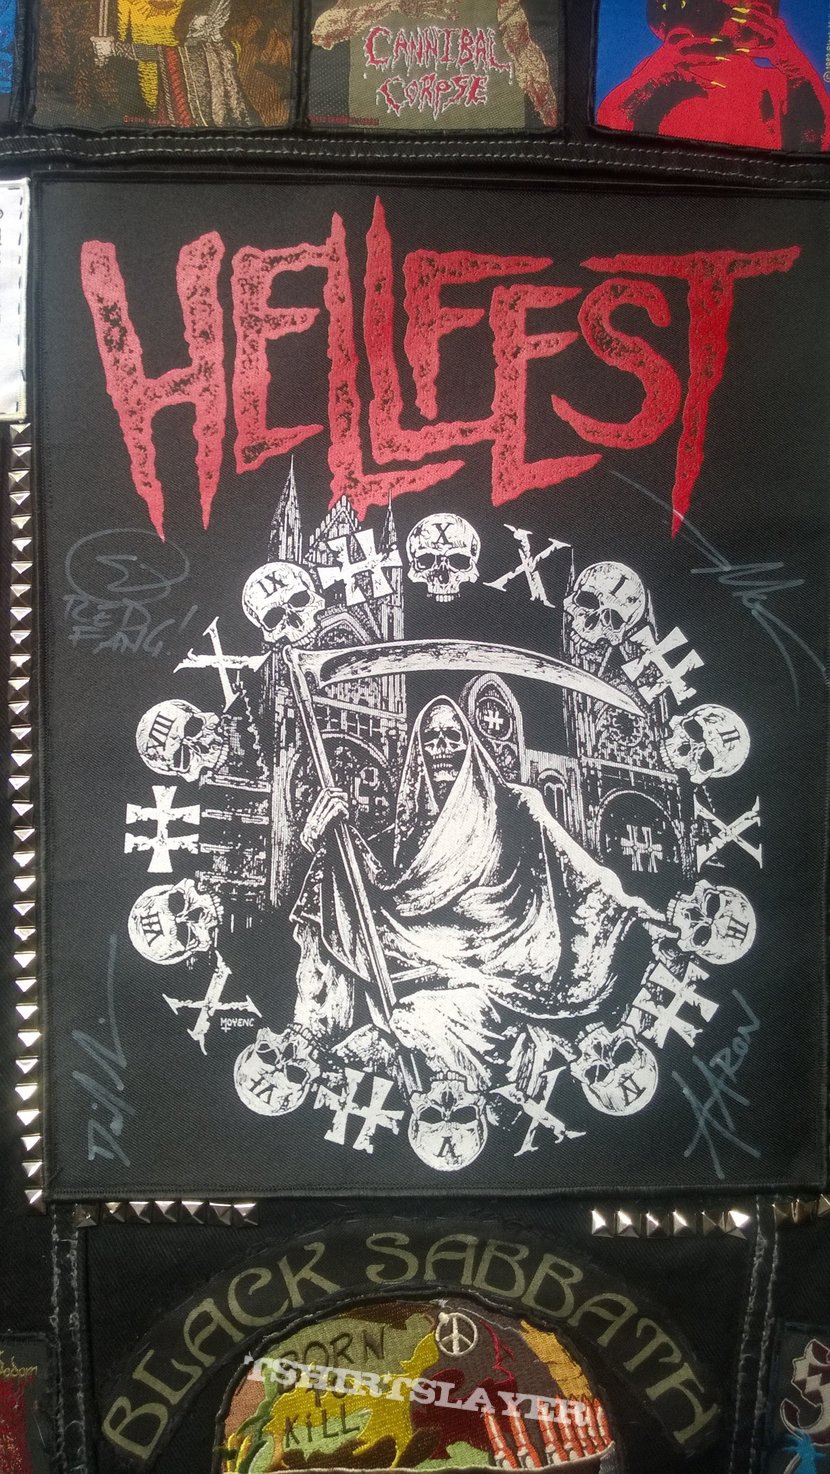 Red Fang Hellfest 2015 Backpatch signed